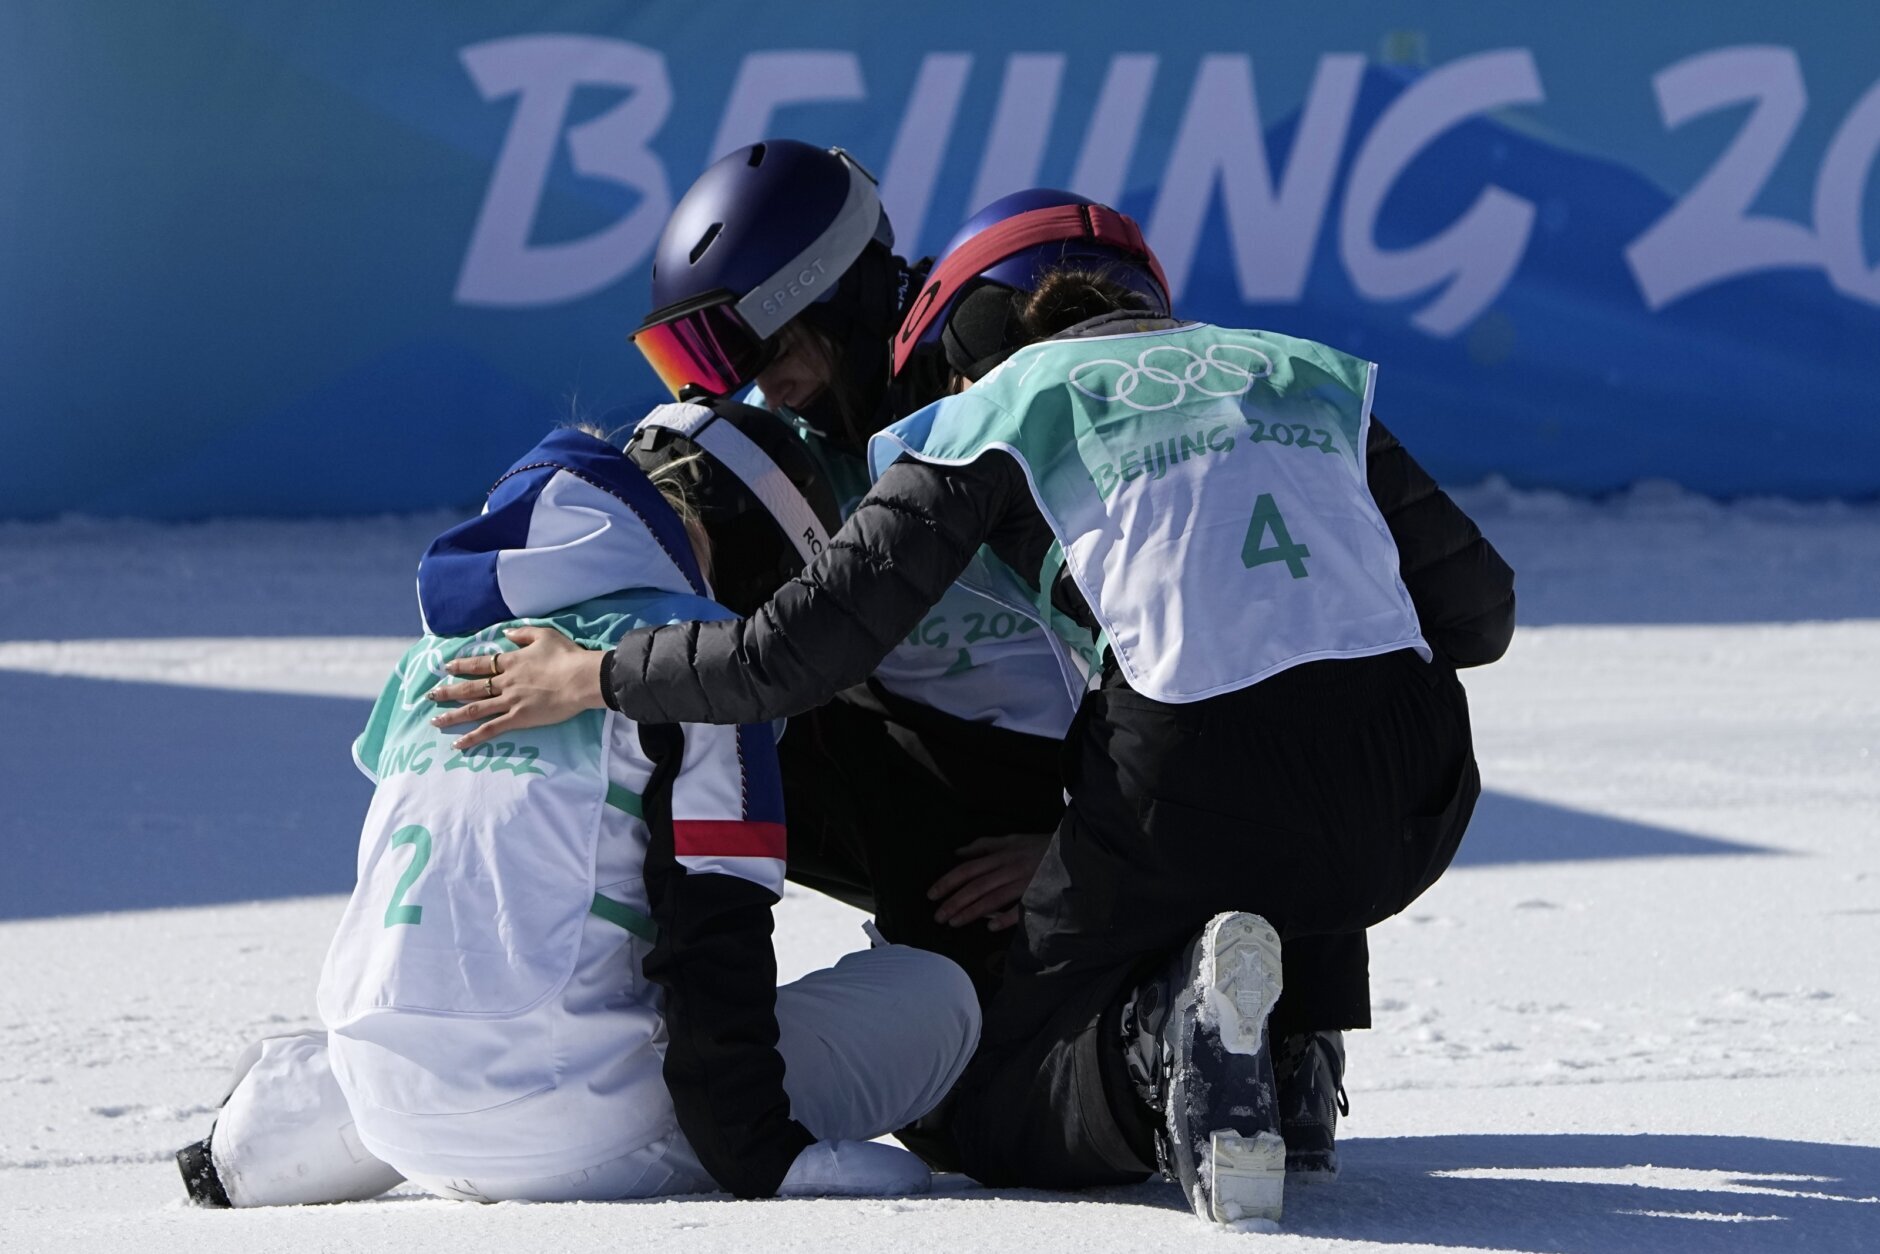 California-born skier Eileen Gu, 18, wins gold for China on Olympic debut  in Freeski